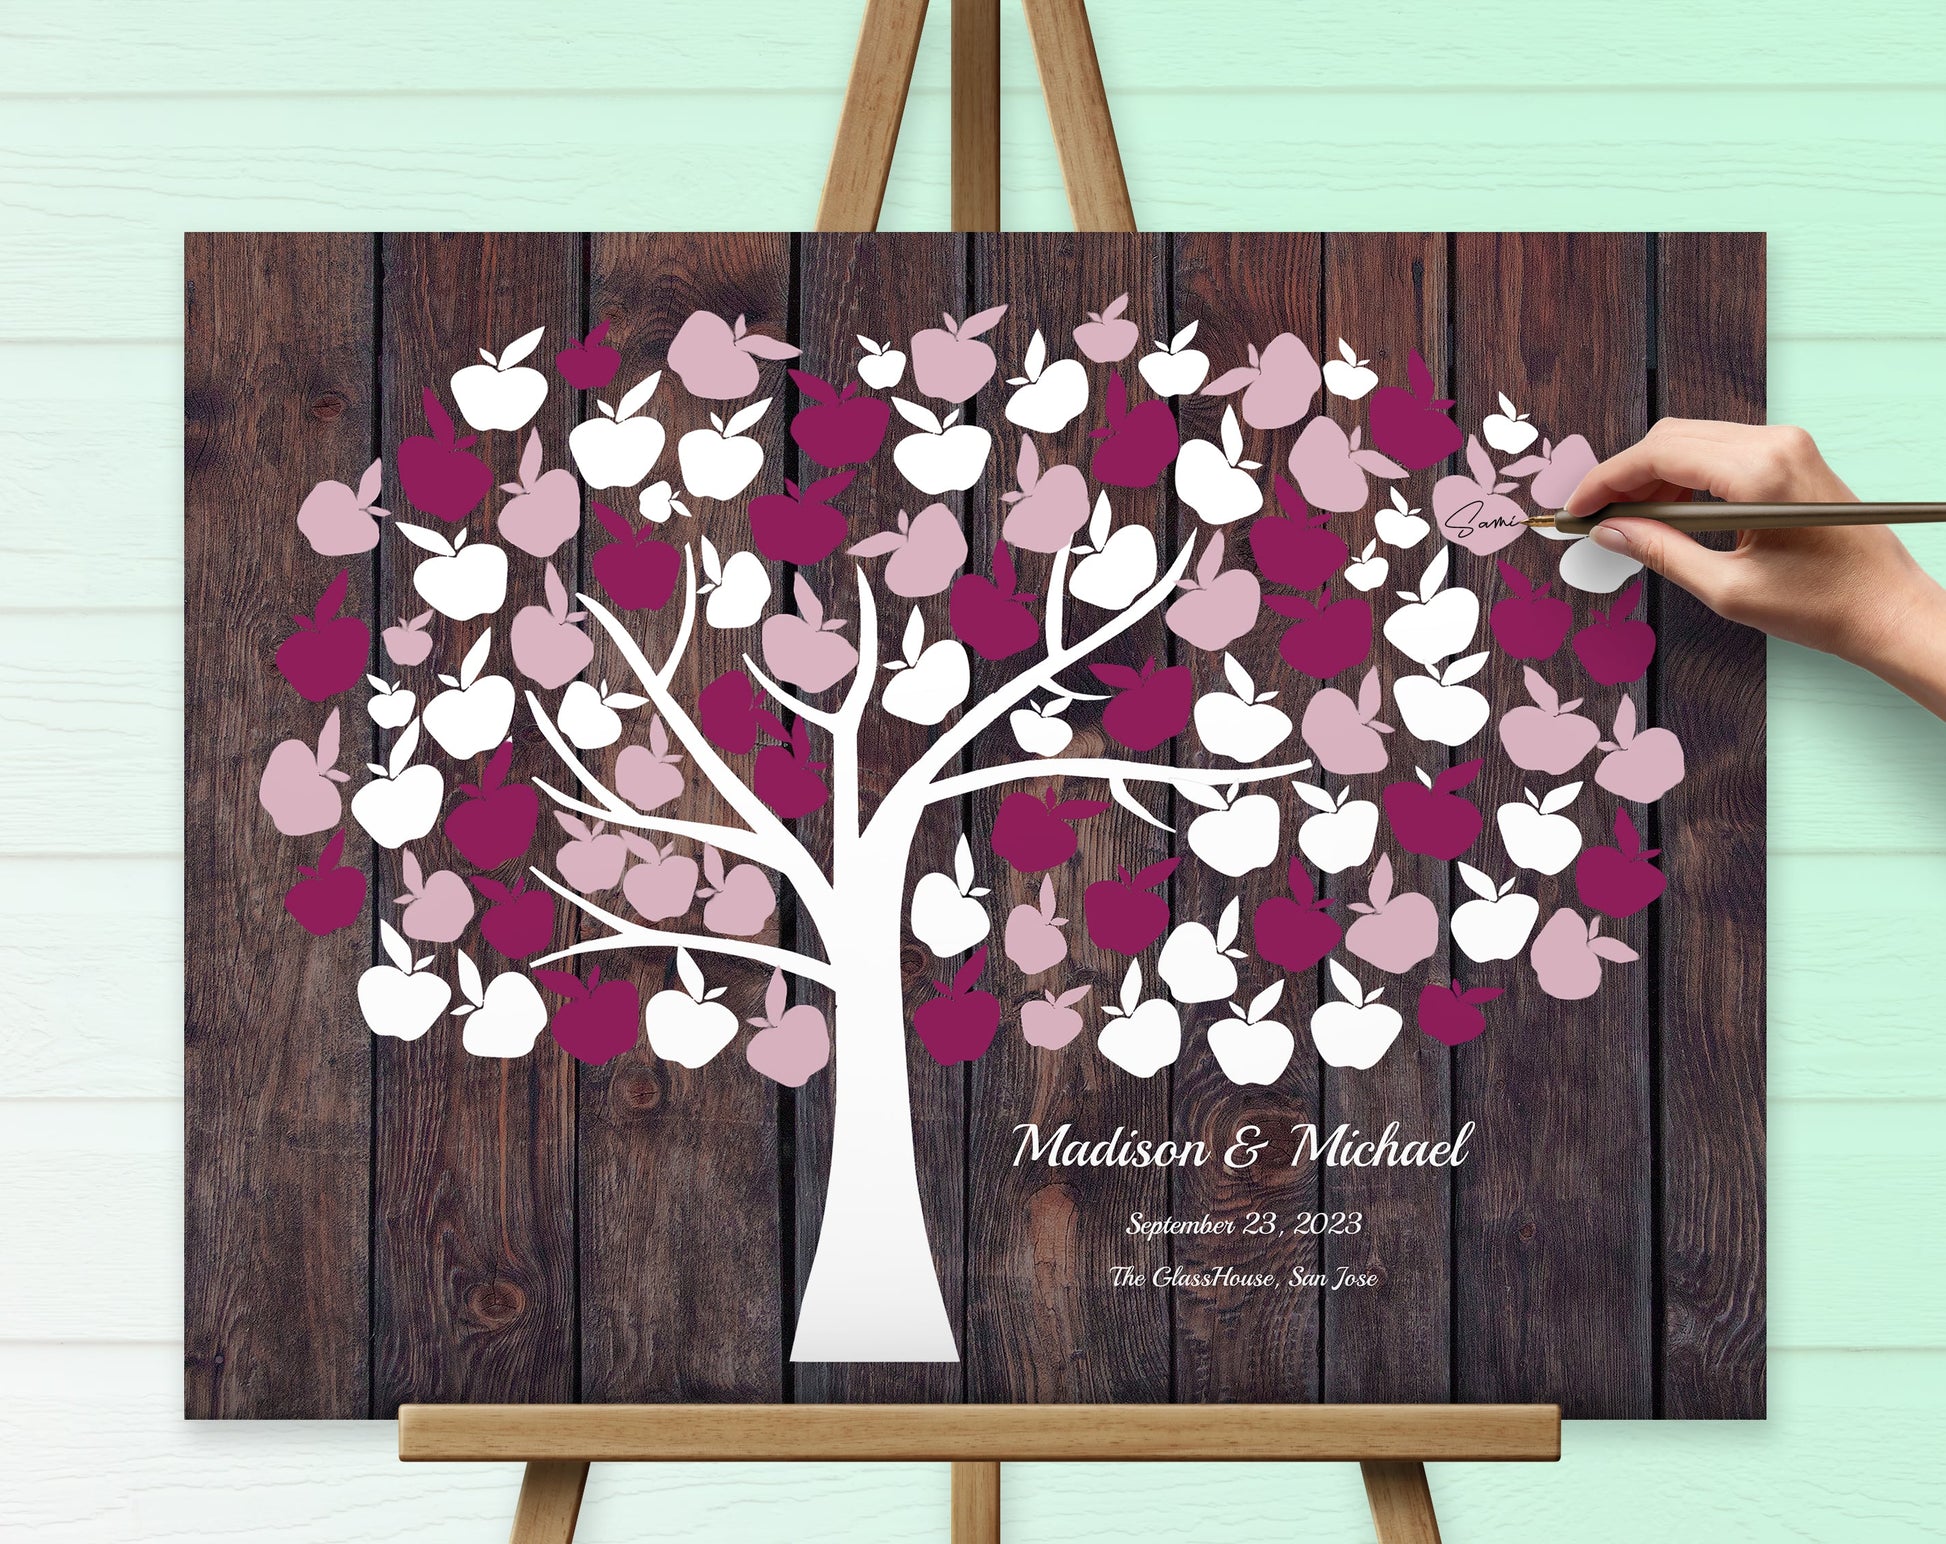 Wedding canvas guest book personalized and colorful pink creme leaves.